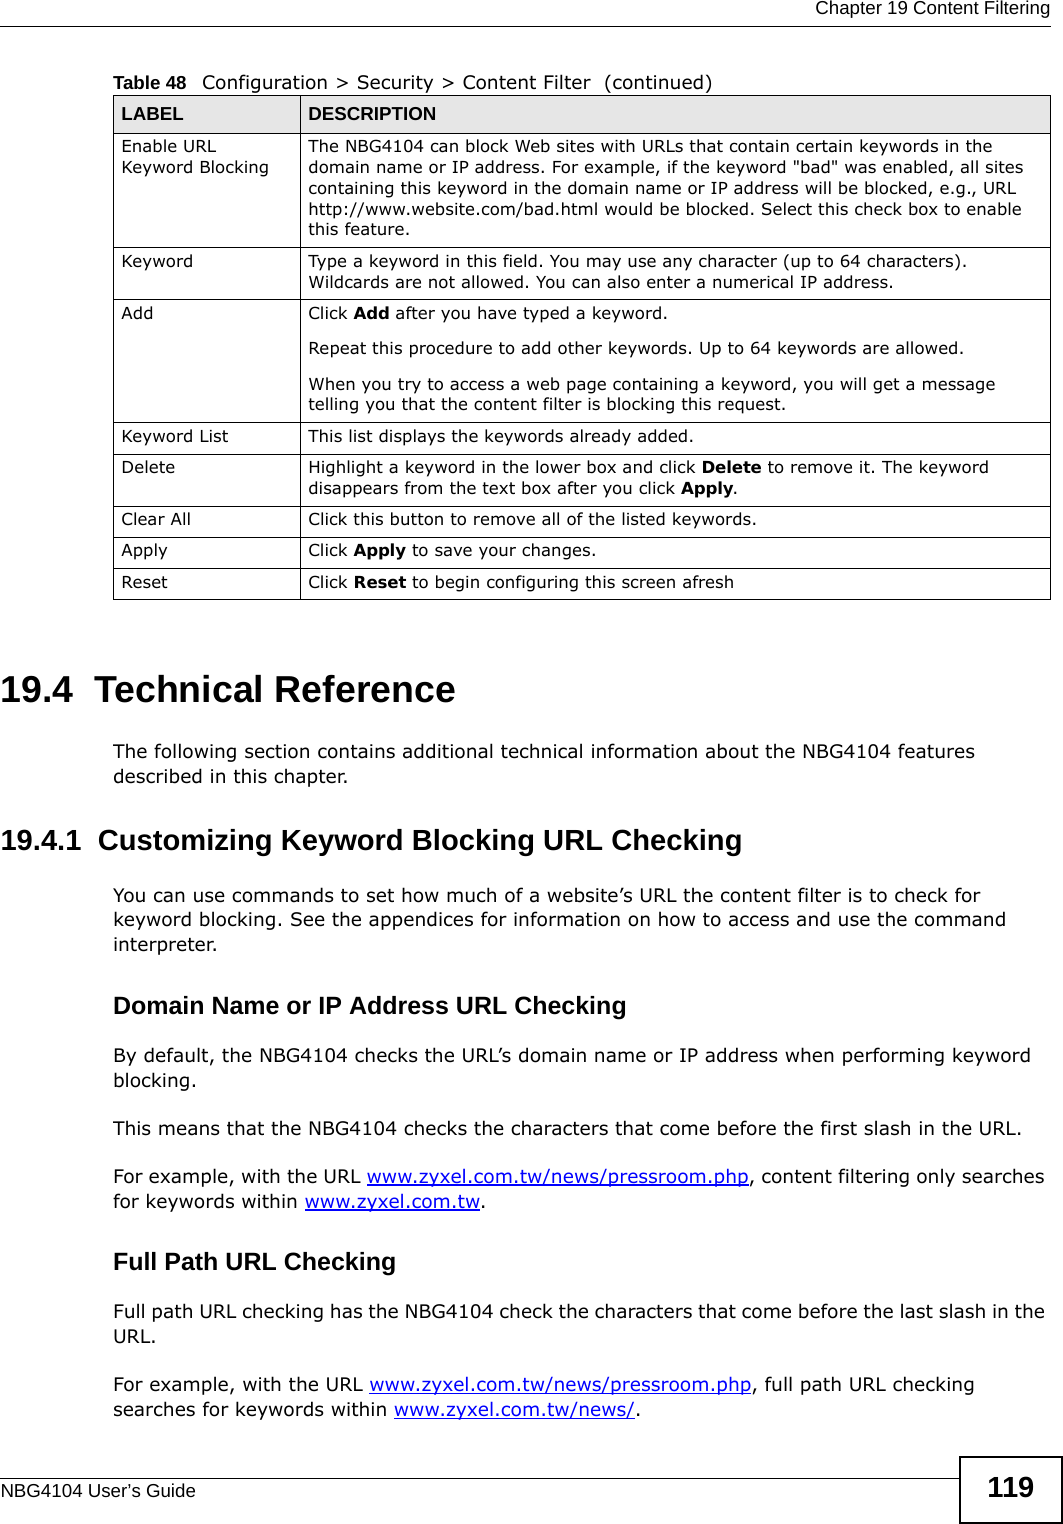  Chapter 19 Content FilteringNBG4104 User’s Guide 11919.4  Technical ReferenceThe following section contains additional technical information about the NBG4104 features described in this chapter.19.4.1  Customizing Keyword Blocking URL CheckingYou can use commands to set how much of a website’s URL the content filter is to check for keyword blocking. See the appendices for information on how to access and use the command interpreter.Domain Name or IP Address URL CheckingBy default, the NBG4104 checks the URL’s domain name or IP address when performing keyword blocking.This means that the NBG4104 checks the characters that come before the first slash in the URL.For example, with the URL www.zyxel.com.tw/news/pressroom.php, content filtering only searches for keywords within www.zyxel.com.tw.Full Path URL CheckingFull path URL checking has the NBG4104 check the characters that come before the last slash in the URL.For example, with the URL www.zyxel.com.tw/news/pressroom.php, full path URL checking searches for keywords within www.zyxel.com.tw/news/.Enable URL Keyword BlockingThe NBG4104 can block Web sites with URLs that contain certain keywords in the domain name or IP address. For example, if the keyword &quot;bad&quot; was enabled, all sites containing this keyword in the domain name or IP address will be blocked, e.g., URL http://www.website.com/bad.html would be blocked. Select this check box to enable this feature.Keyword Type a keyword in this field. You may use any character (up to 64 characters). Wildcards are not allowed. You can also enter a numerical IP address.Add  Click Add after you have typed a keyword. Repeat this procedure to add other keywords. Up to 64 keywords are allowed.When you try to access a web page containing a keyword, you will get a message telling you that the content filter is blocking this request.Keyword List This list displays the keywords already added. Delete Highlight a keyword in the lower box and click Delete to remove it. The keyword disappears from the text box after you click Apply.Clear All Click this button to remove all of the listed keywords.Apply Click Apply to save your changes.Reset Click Reset to begin configuring this screen afreshTable 48   Configuration &gt; Security &gt; Content Filter  (continued)LABEL DESCRIPTION